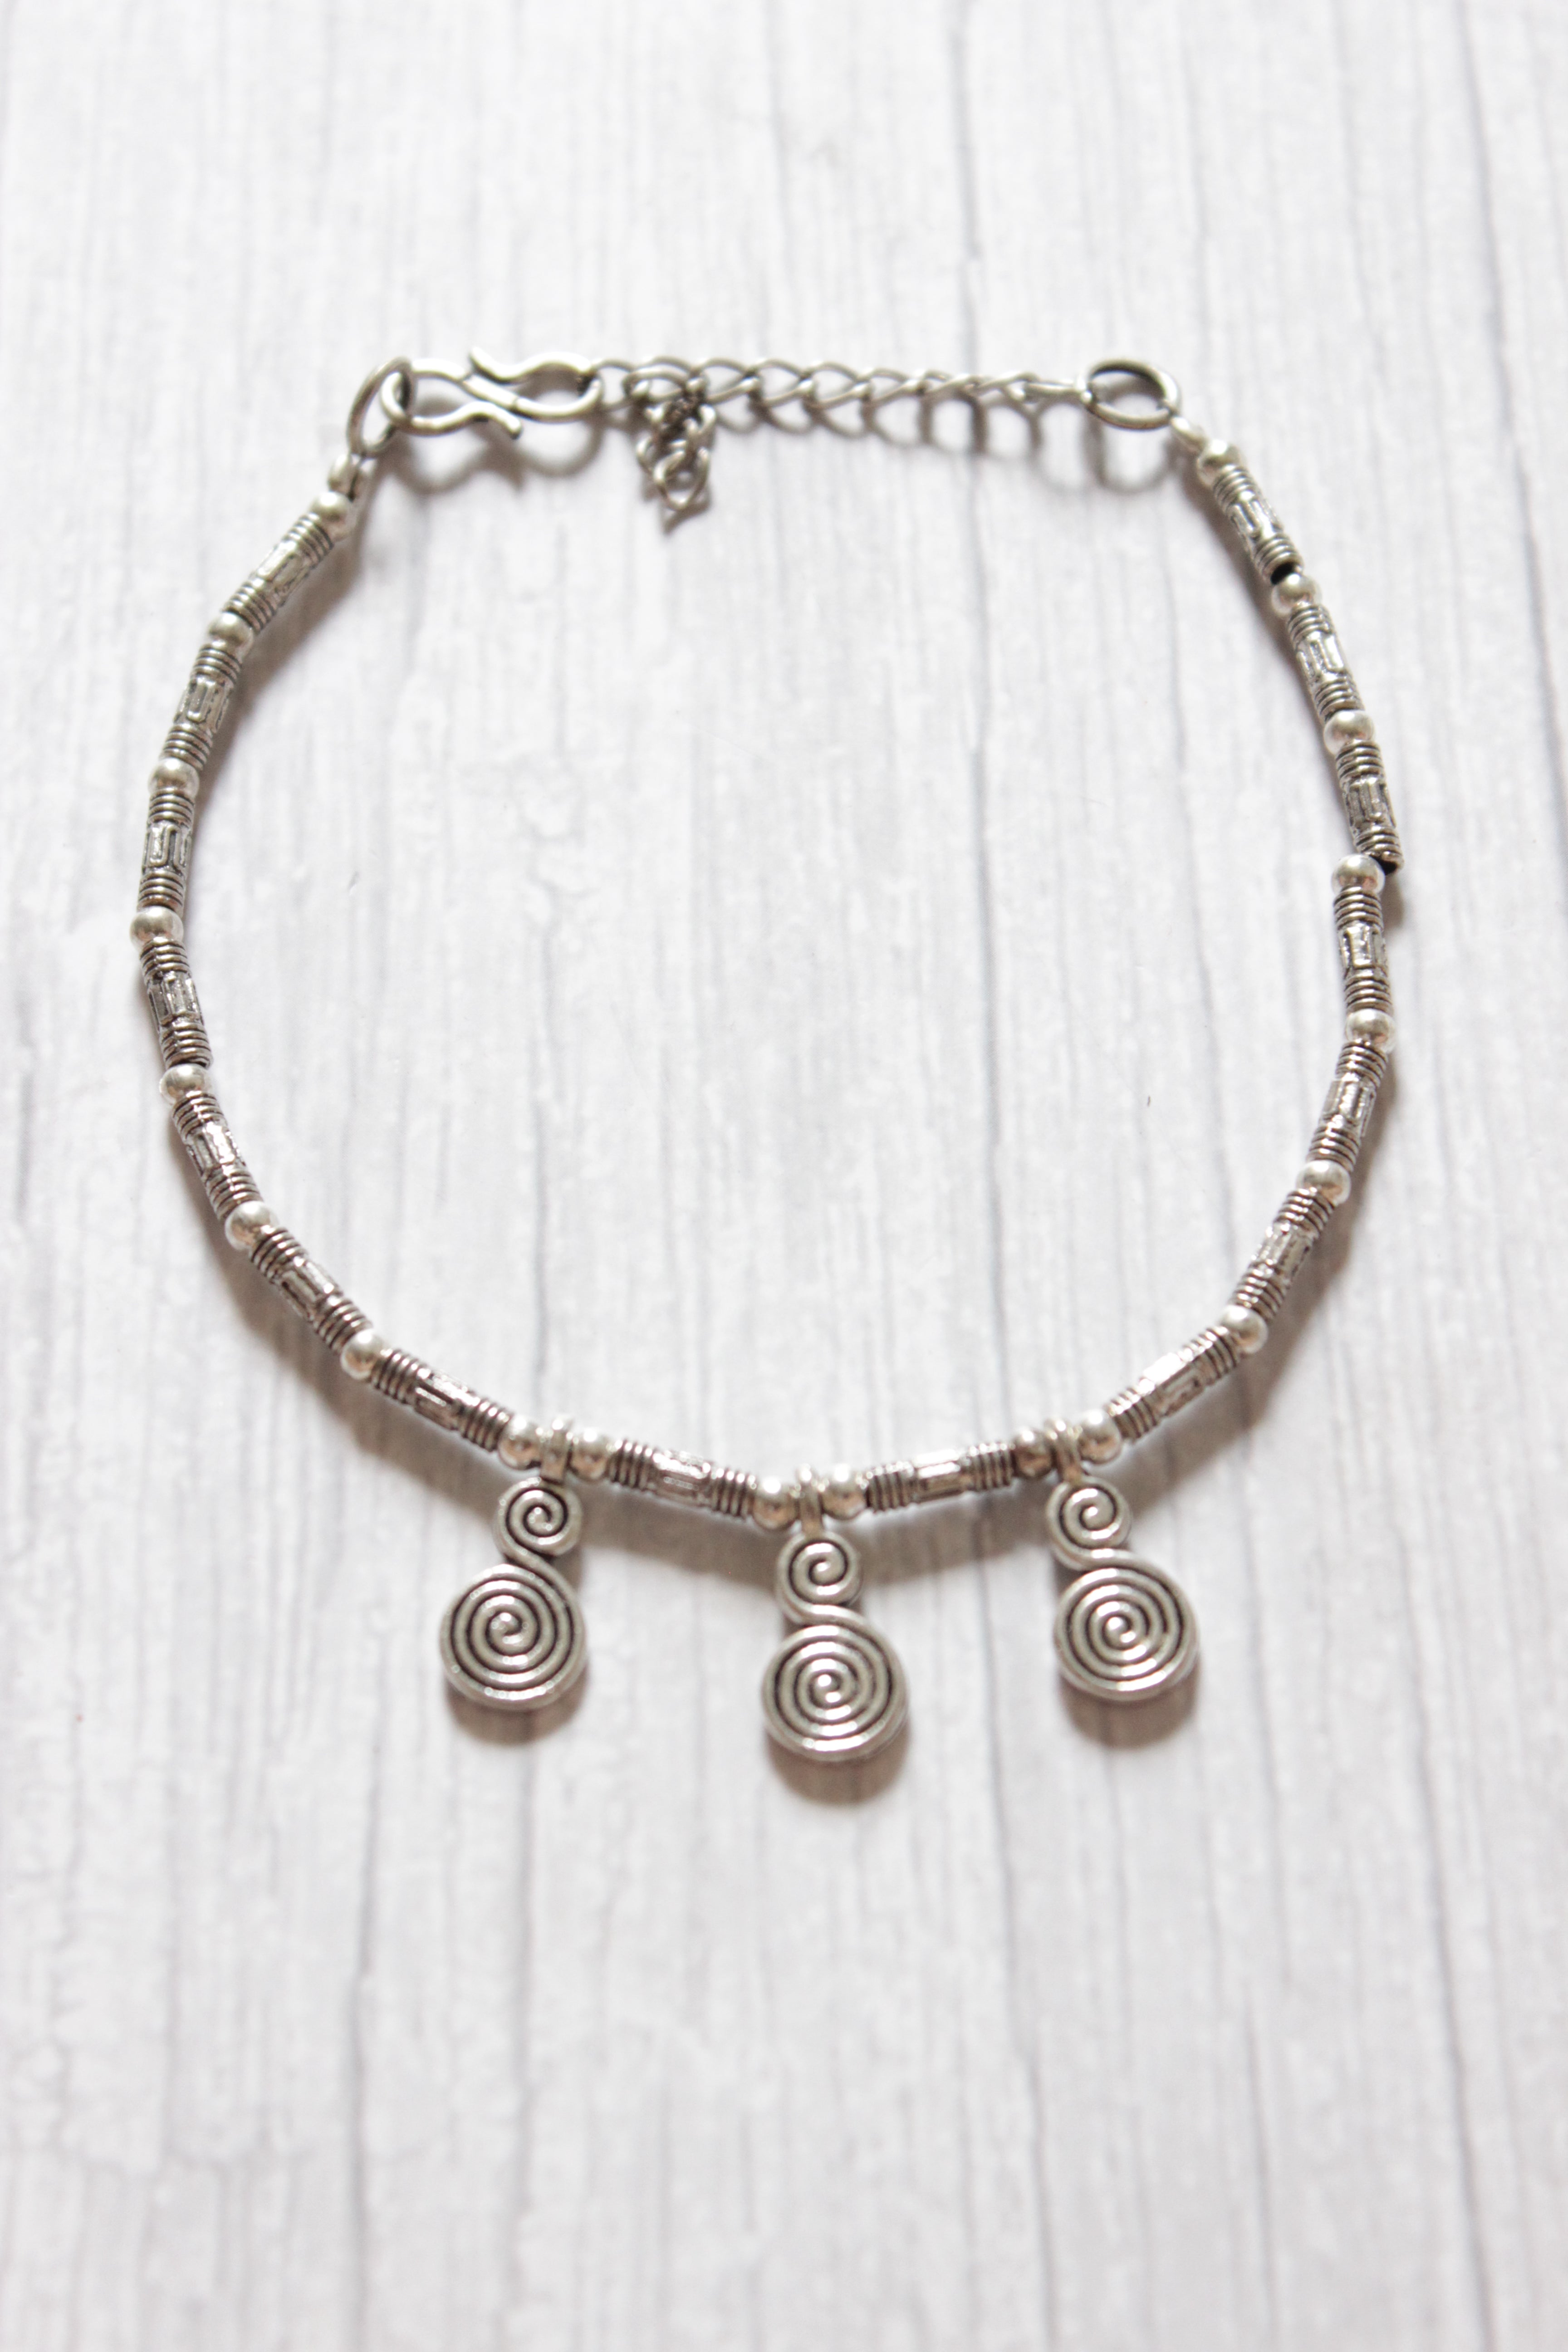 Silver Finish Single Metal Anklet Accentuated with Spiral Metal Accents